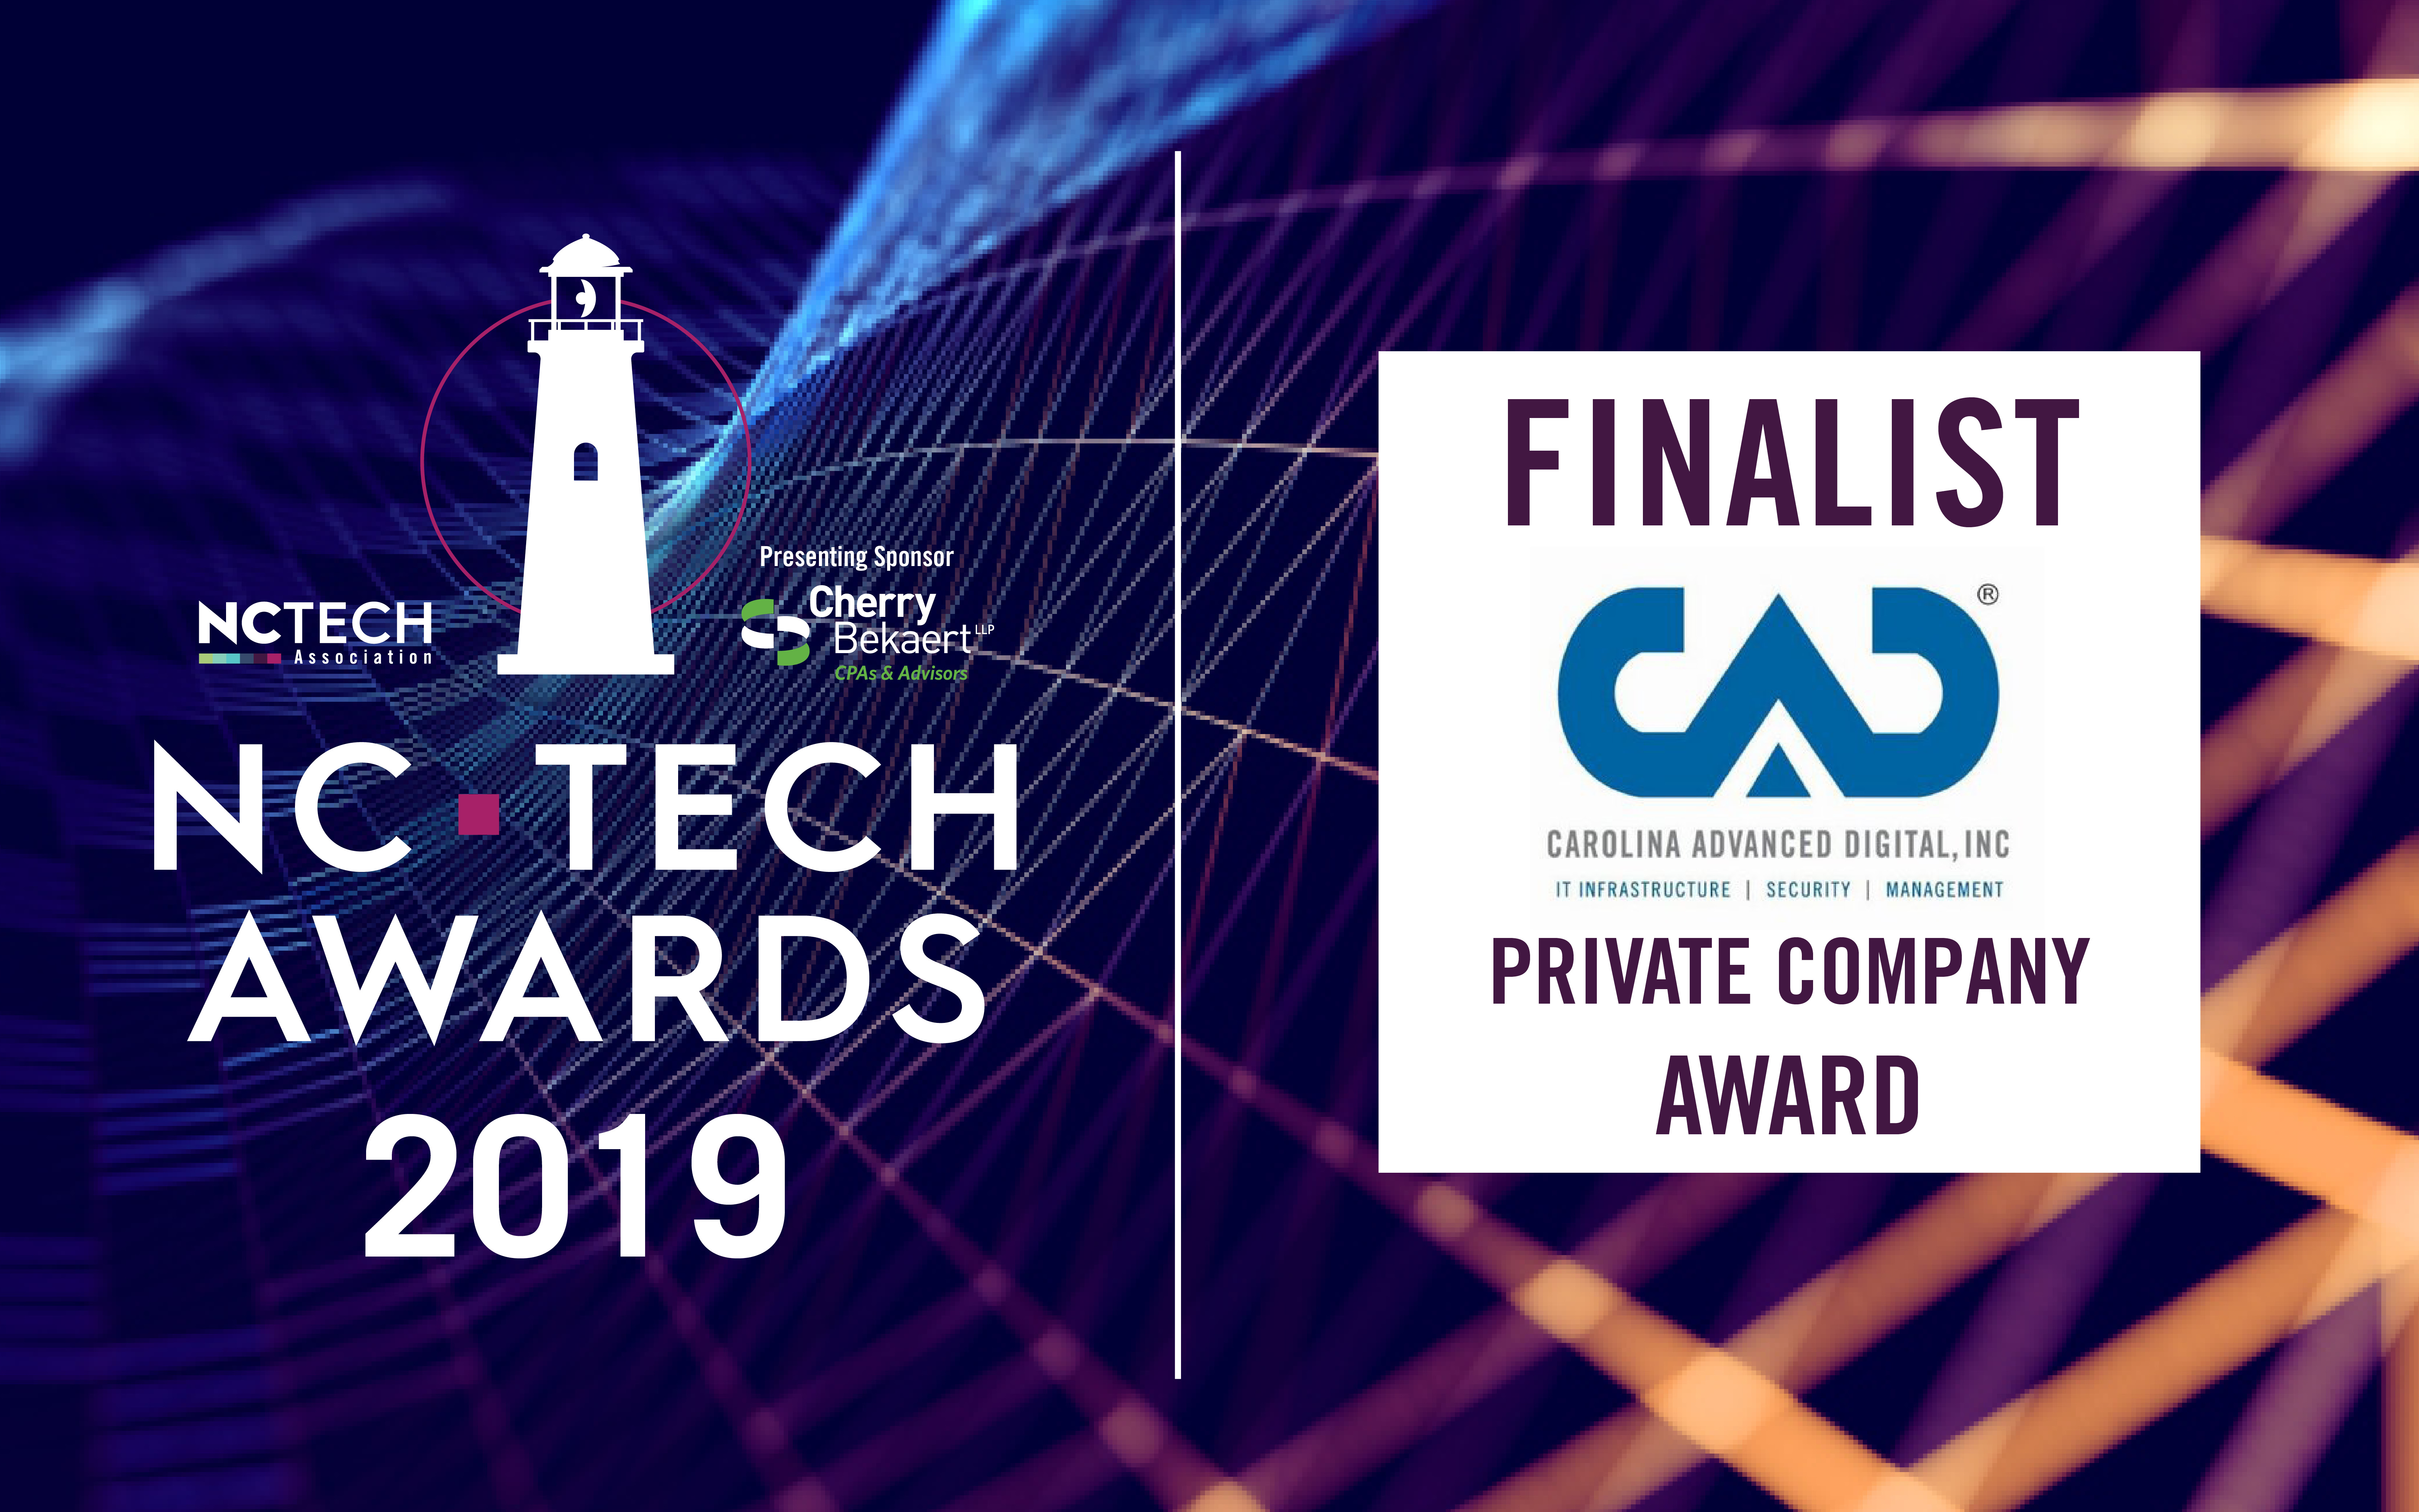 Carolina Advanced Digital finalist in 2019 NC TECH awards for outstanding performance, innovation, and growth